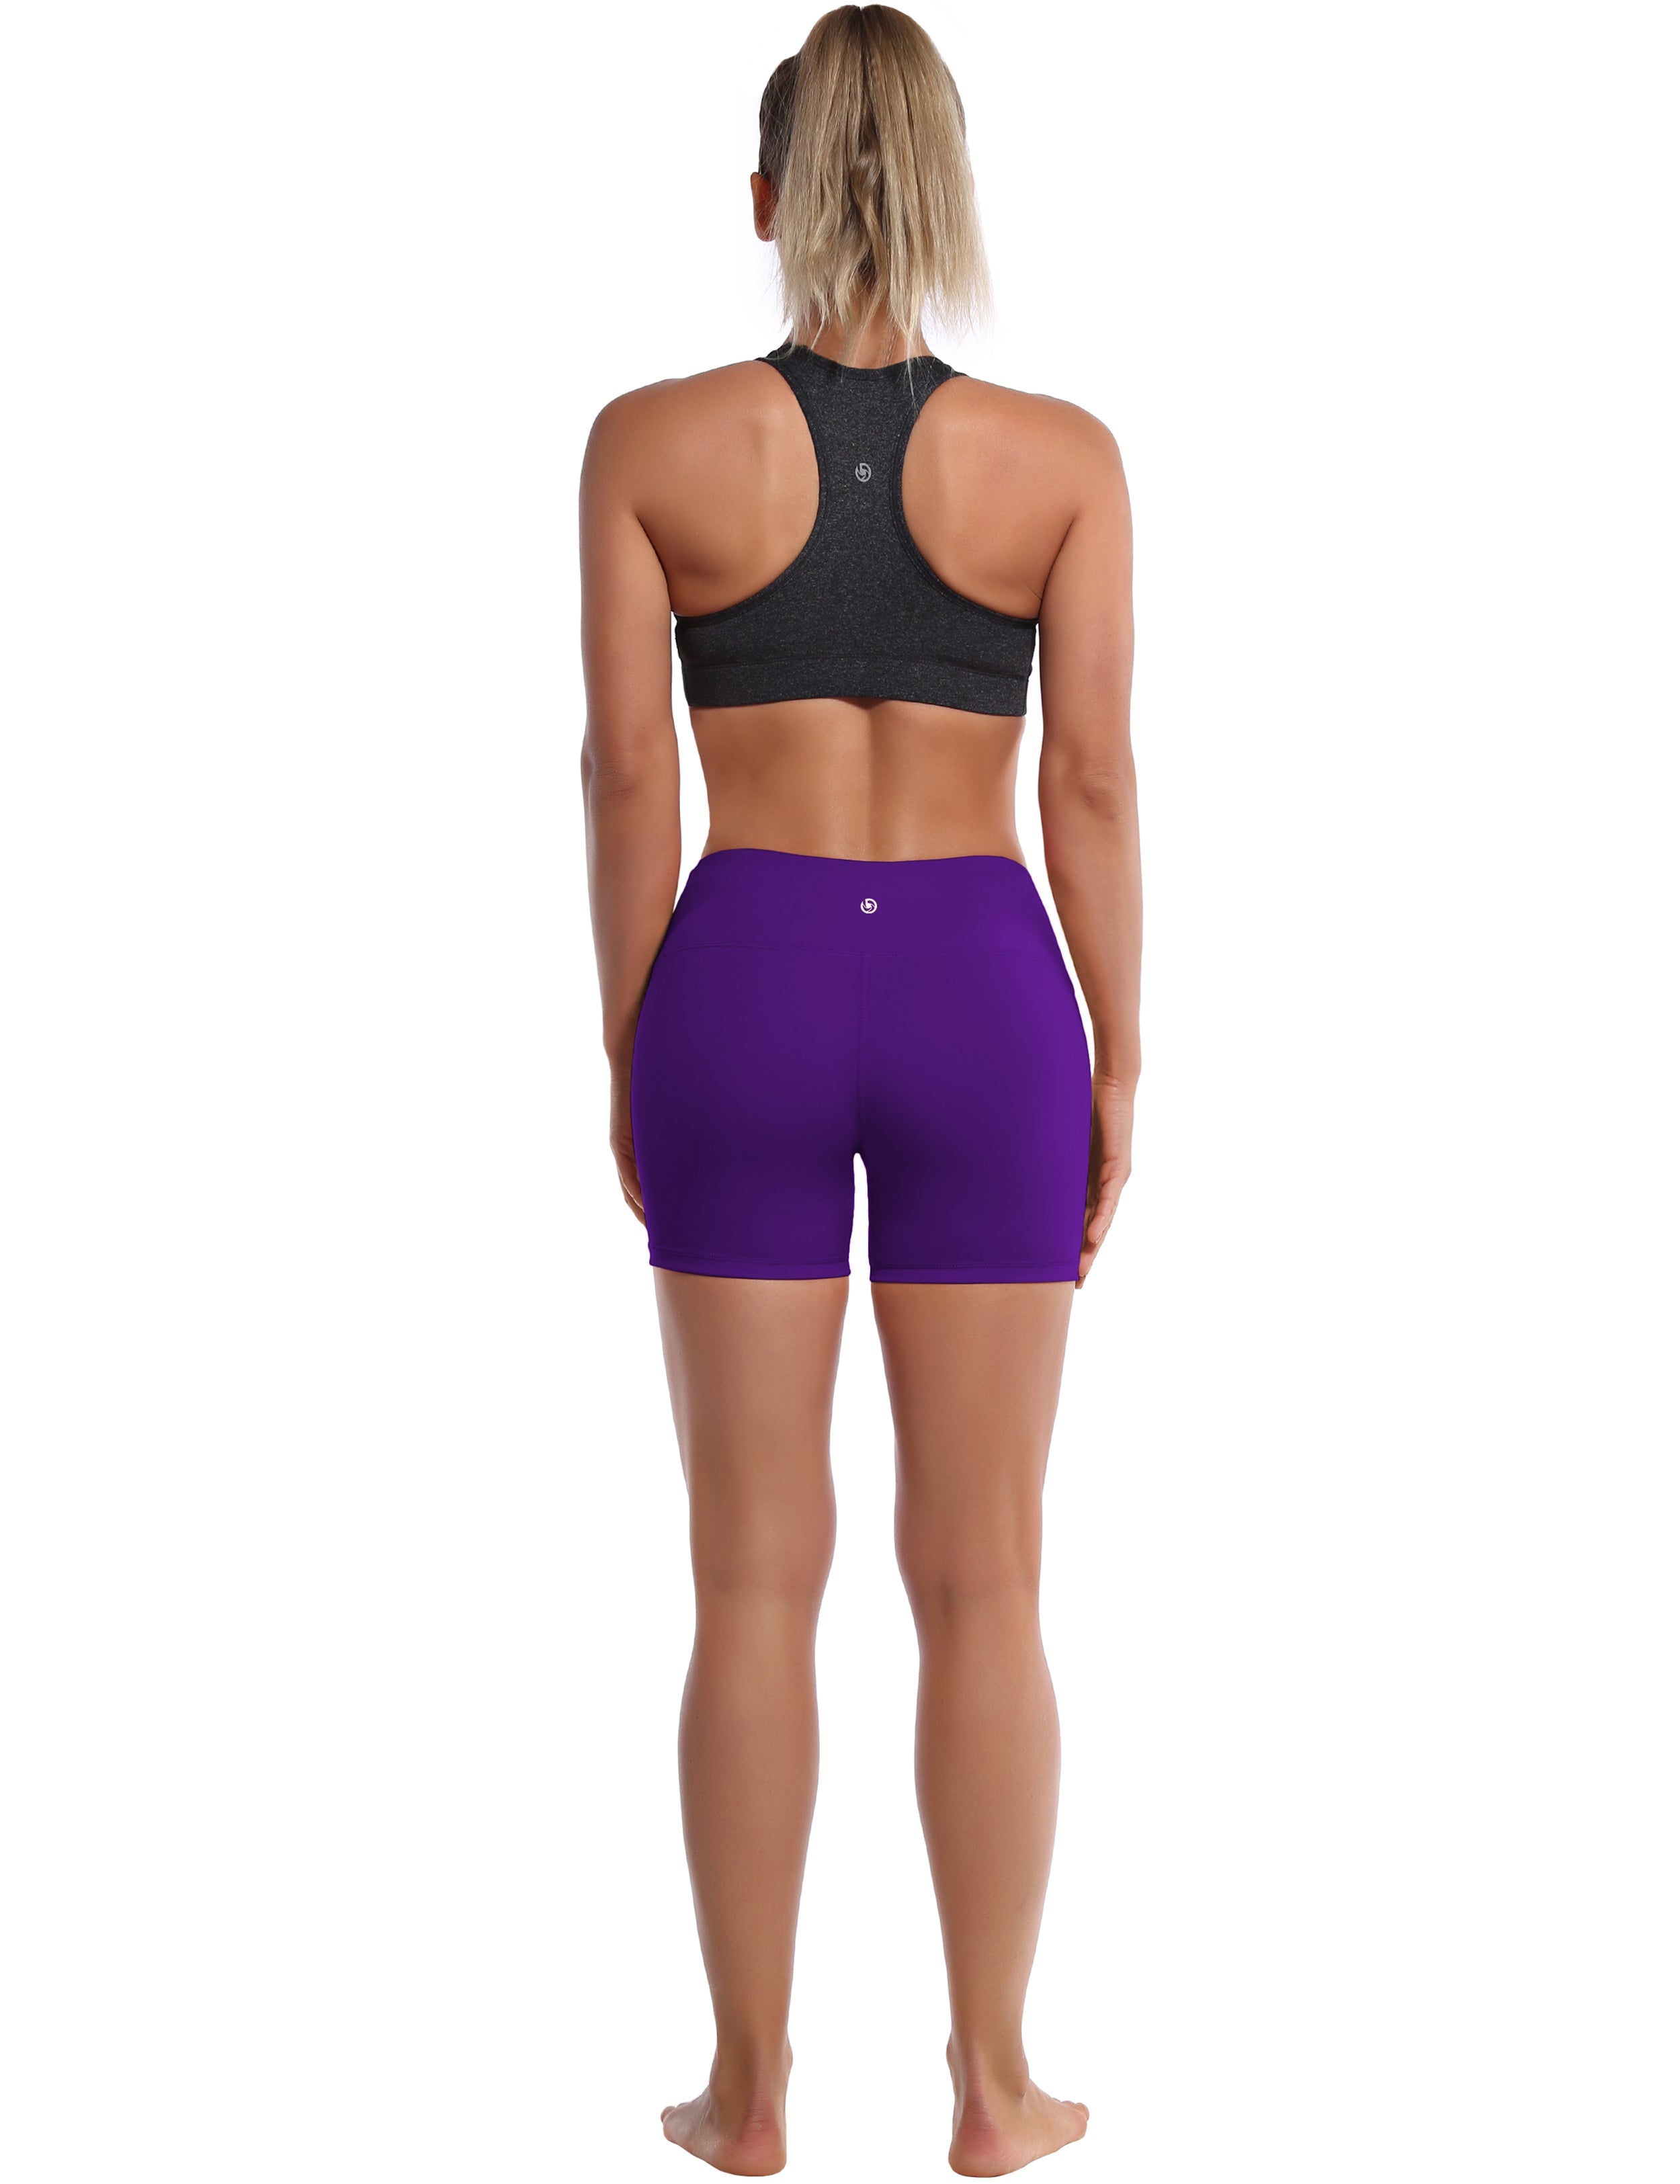 4" Pilates Shorts eggplantpurple Sleek, soft, smooth and totally comfortable: our newest style is here. Softest-ever fabric High elasticity High density 4-way stretch Fabric doesn't attract lint easily No see-through Moisture-wicking Machine wash 75% Nylon, 25% Spandex